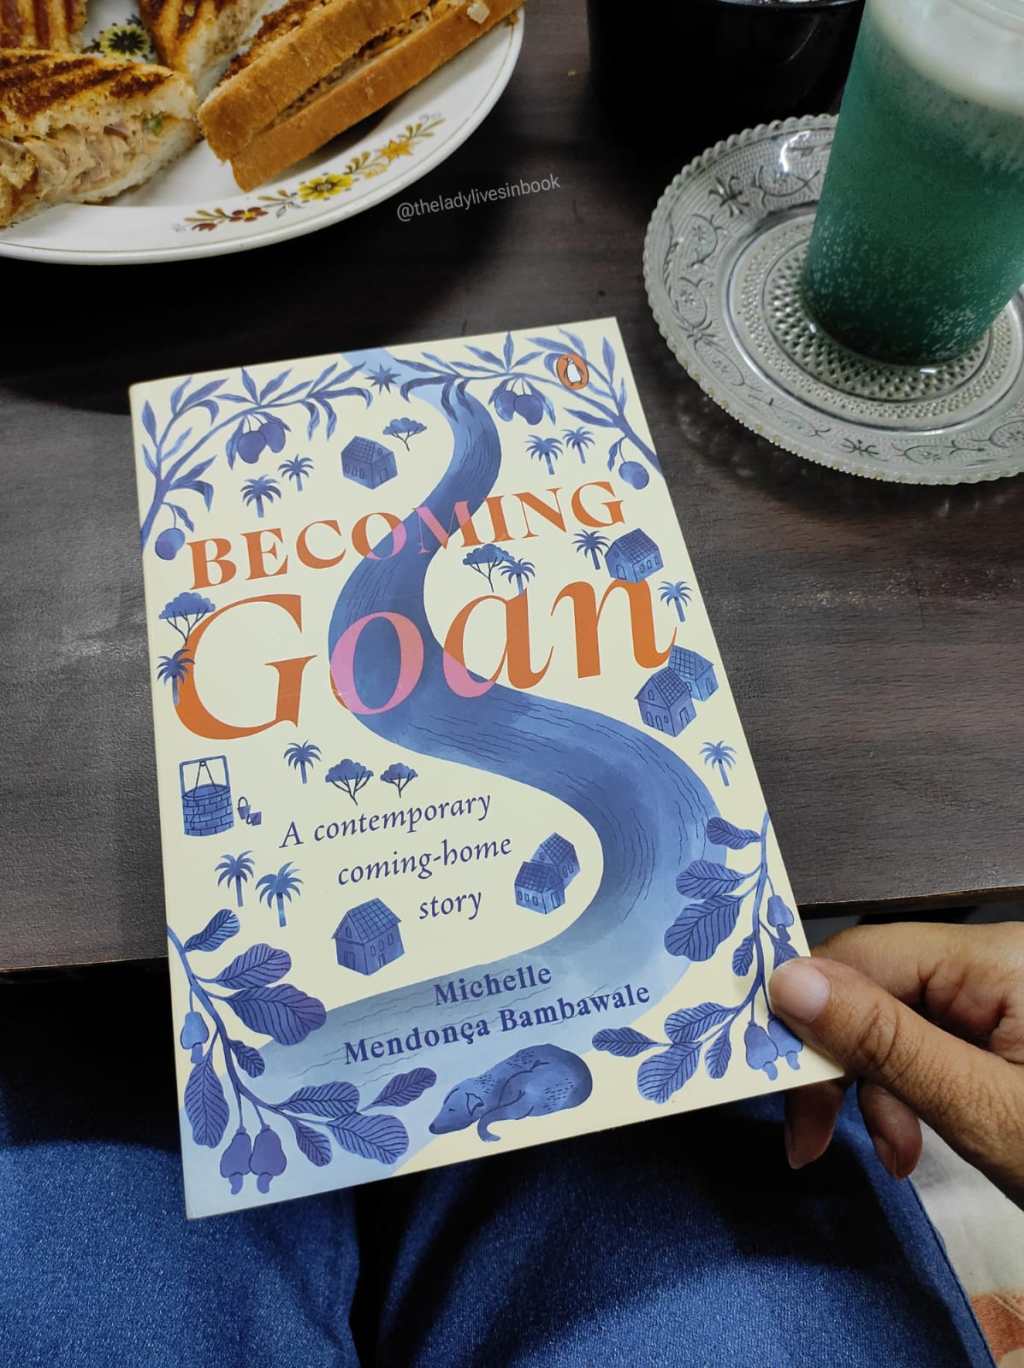 A candid memoir that is loaded with information: Becoming Goan By Michelle Mendonca Bambawale – Book Review